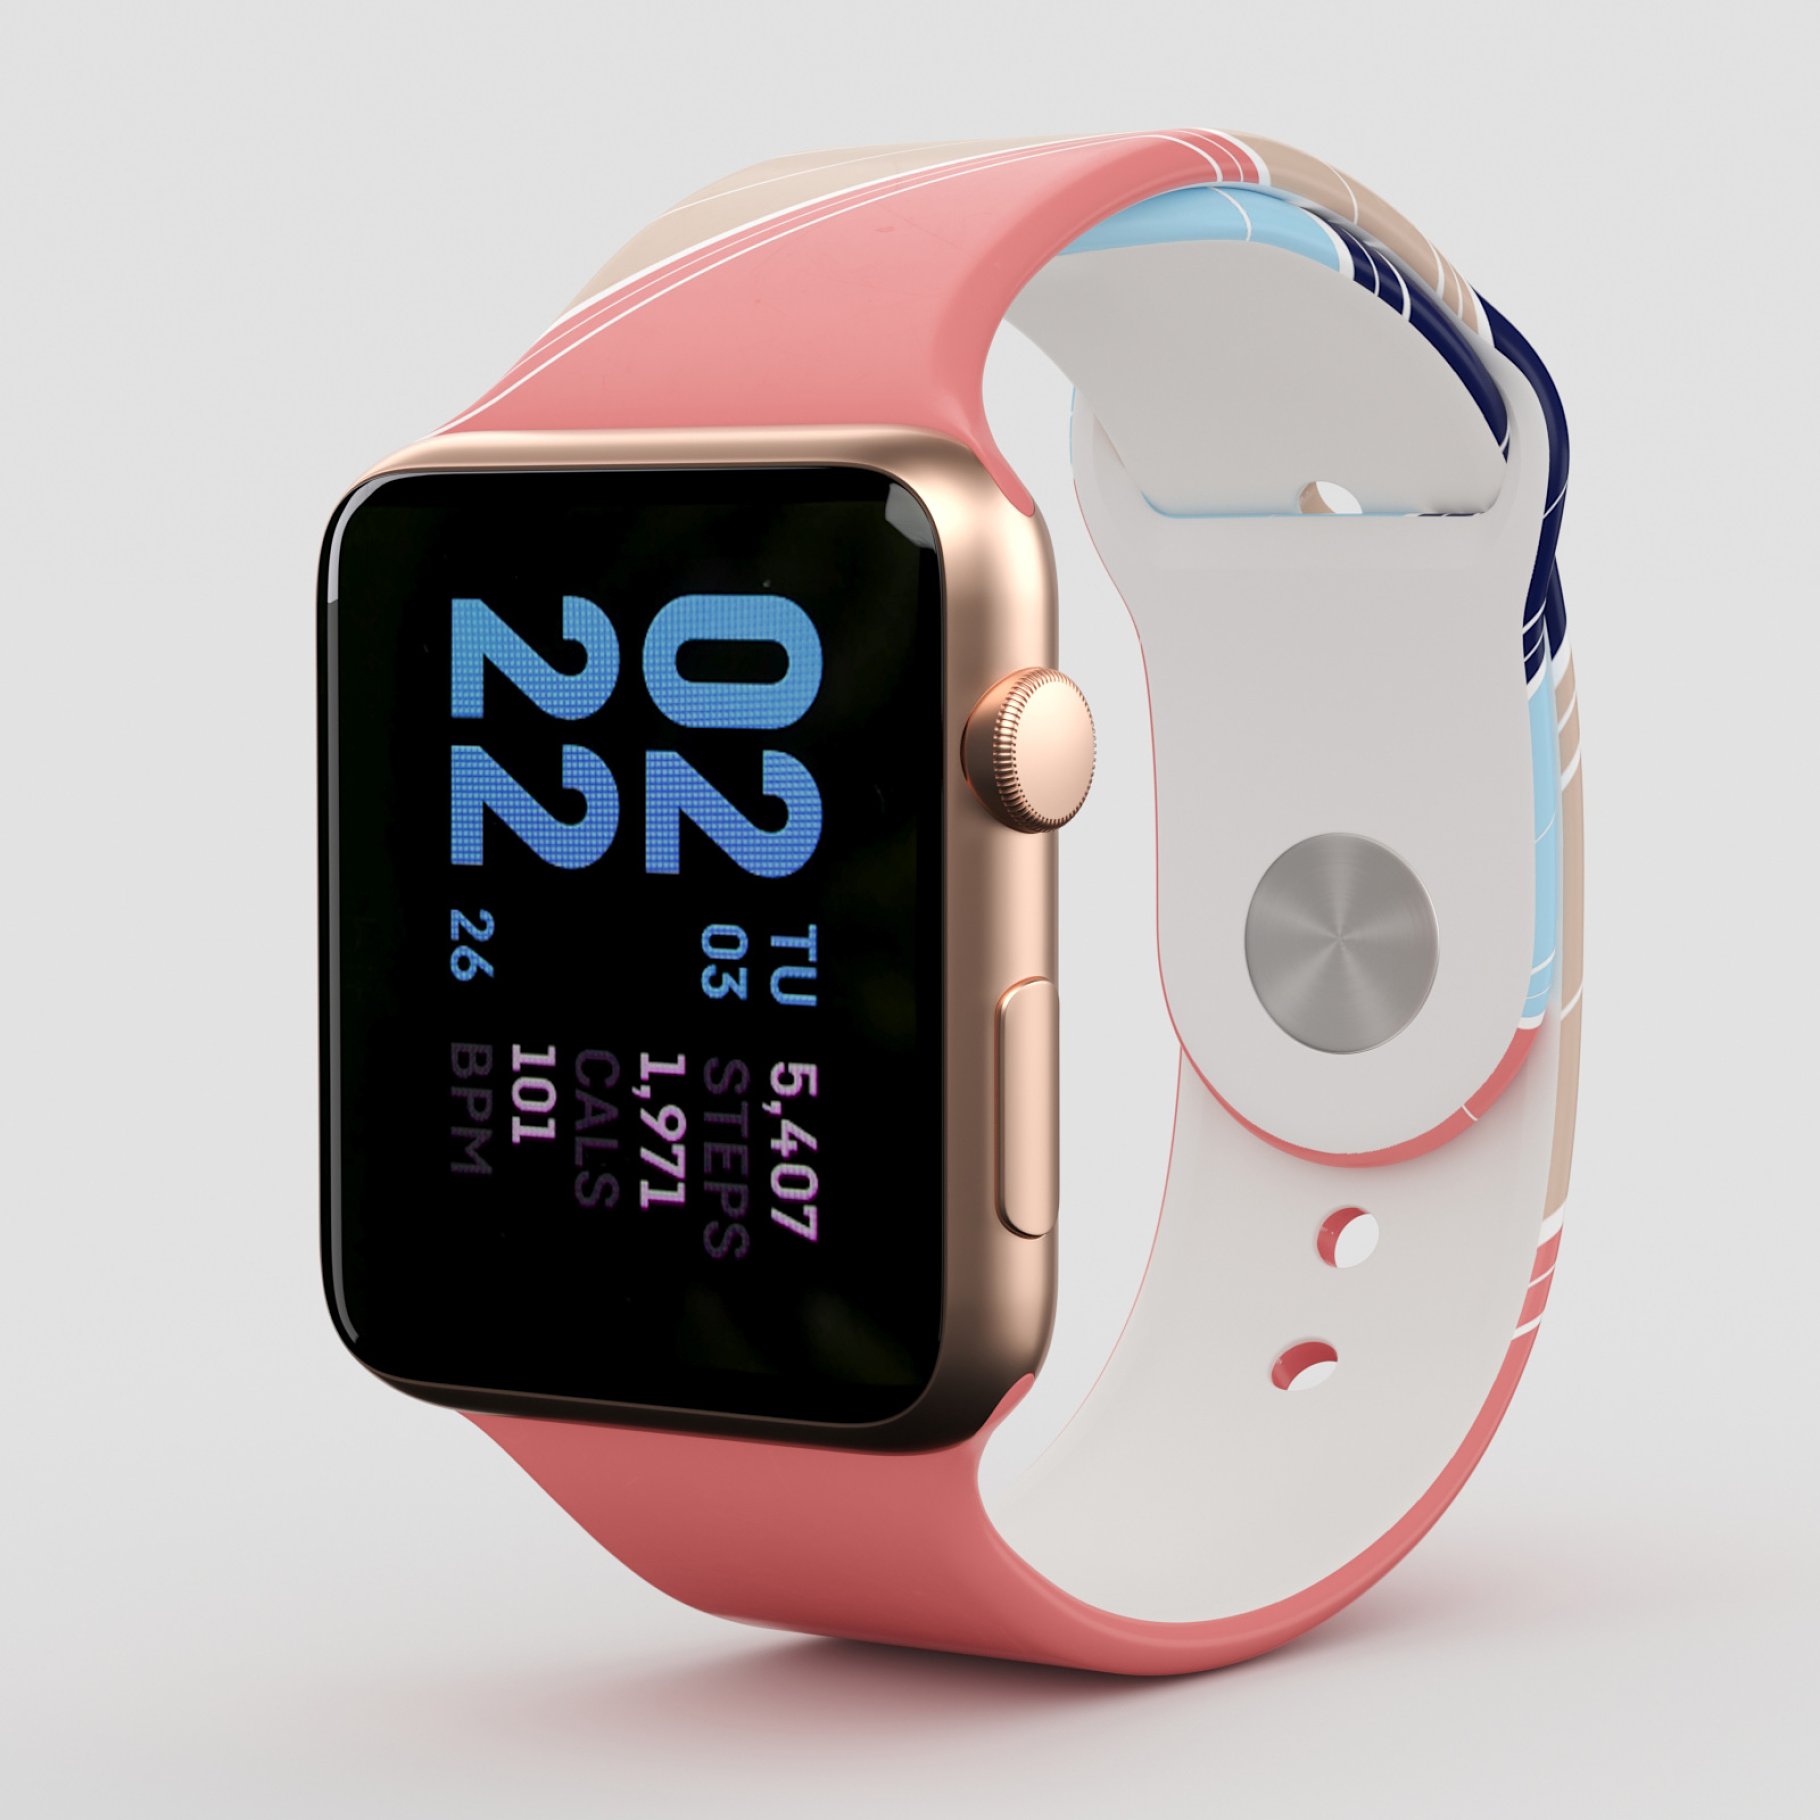 Blue screen and pink strap.